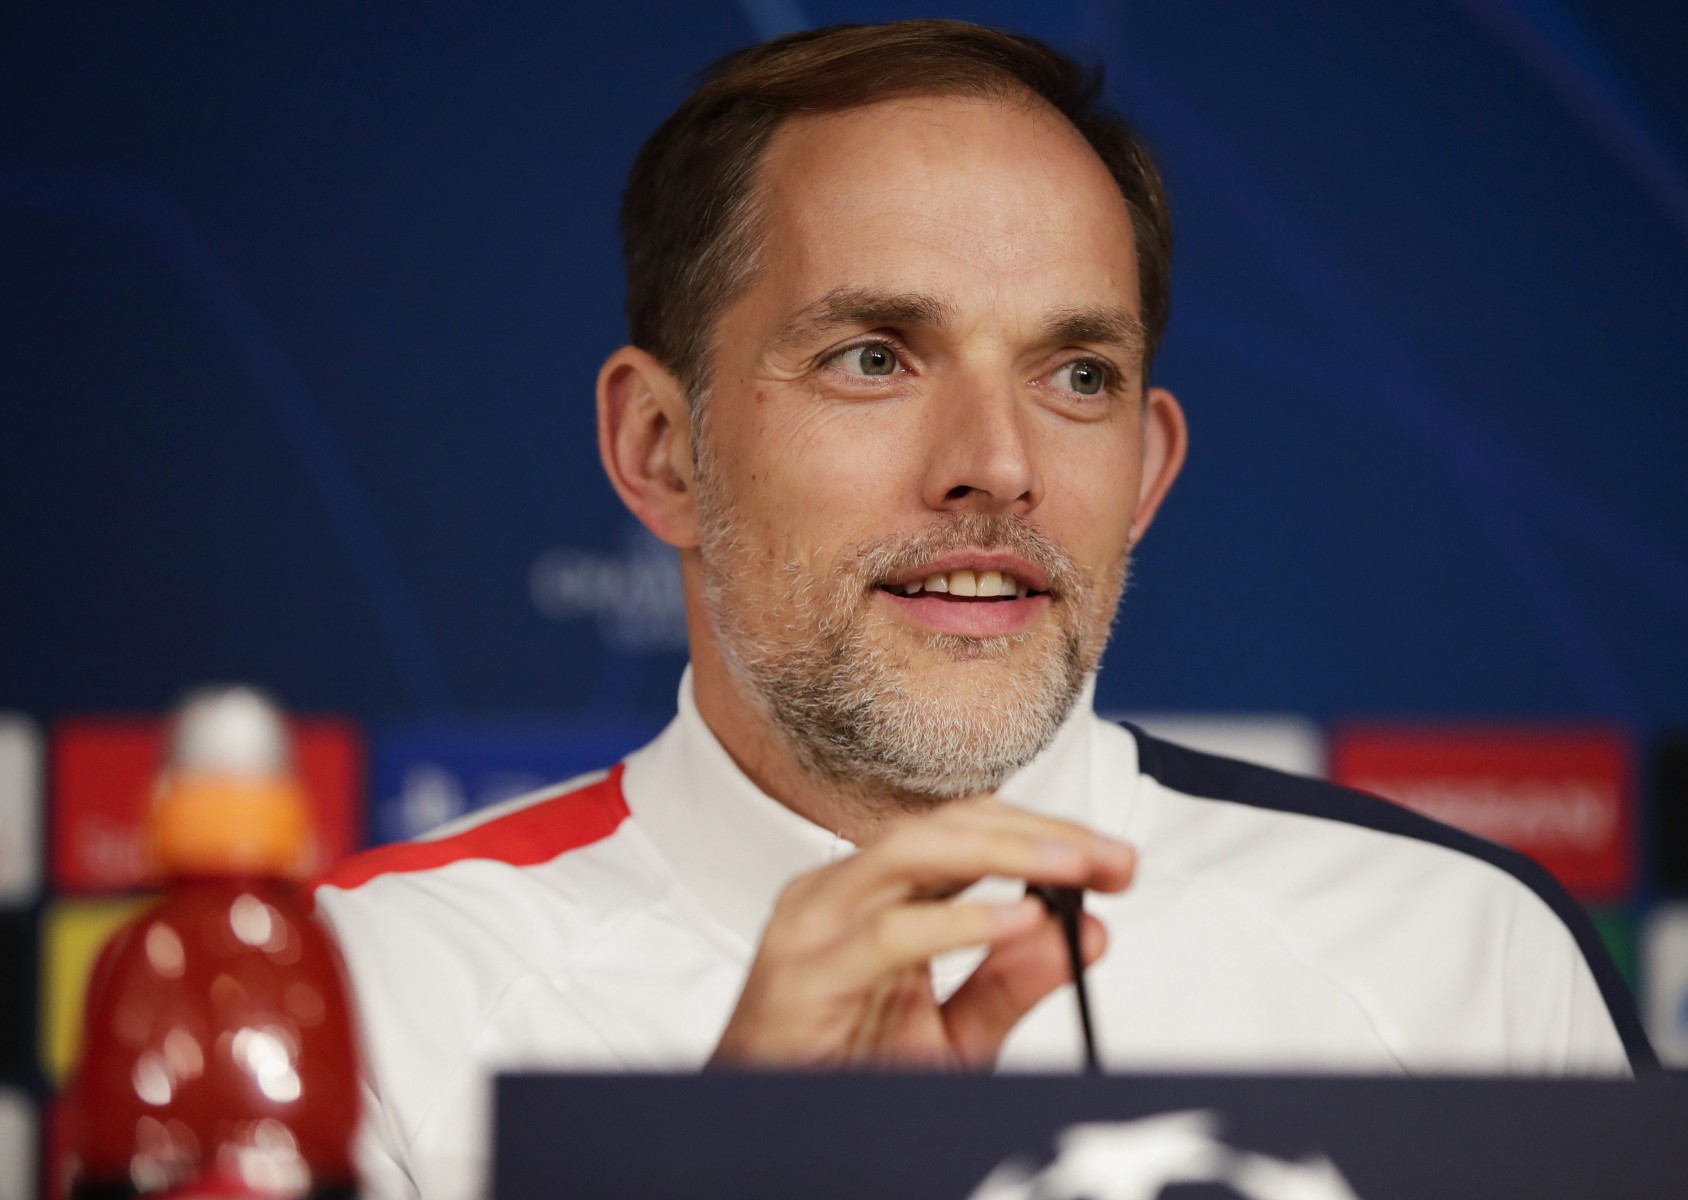 Former Borussia Dortmund manager Thomas Tuchel has continued with PSG's domination of Ligue 1, with an eight-point lead over second-placed Marseille